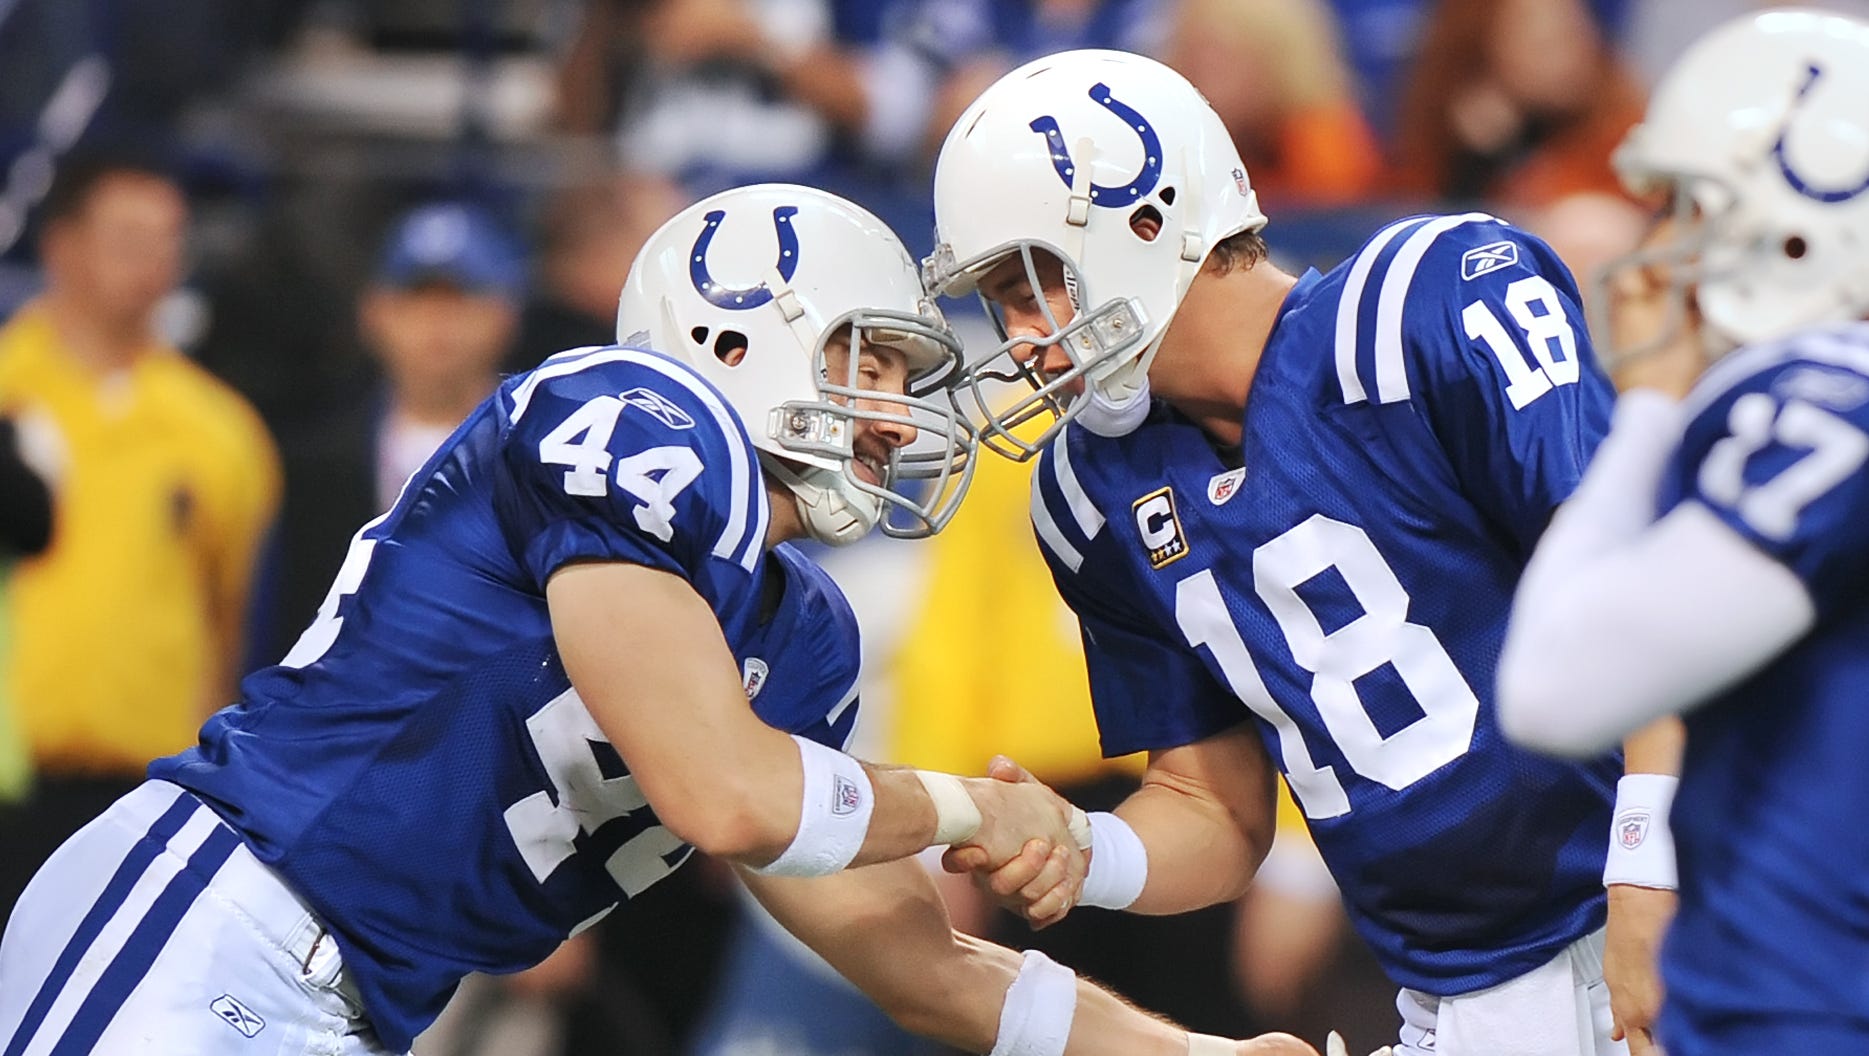 "He was able to keep everyone happy, and there were a lot of mouths to feed on those teams," former Colts tight end Dallas Clark said of Peyton Manning.